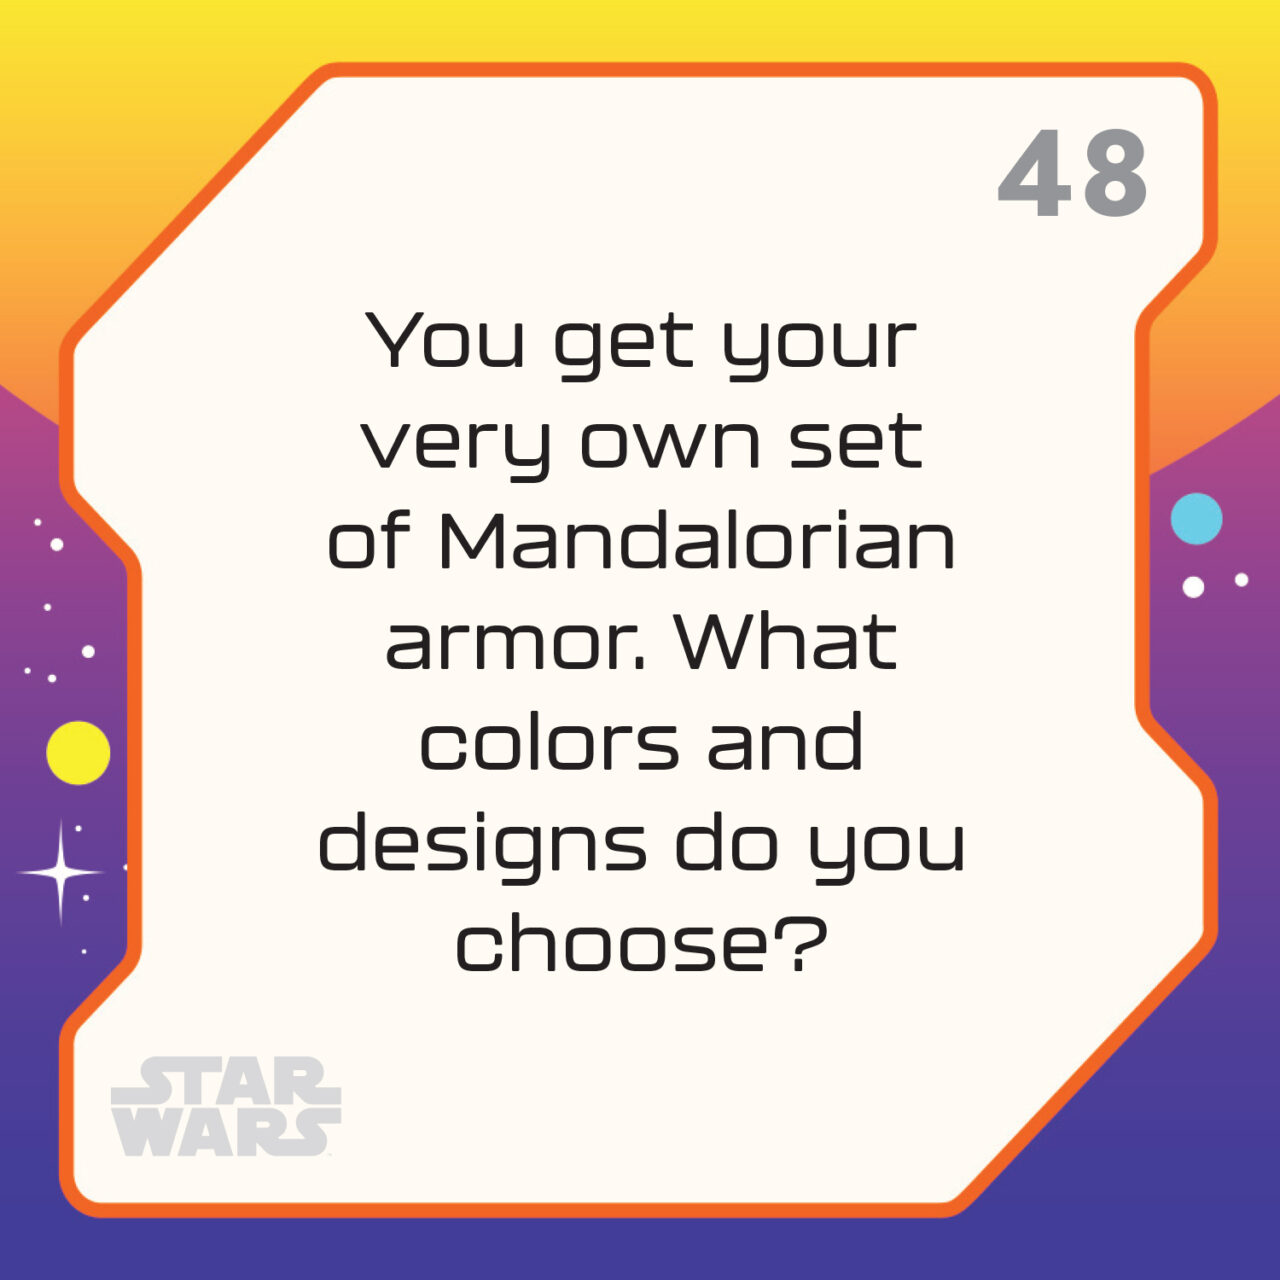 Star Wars Conversation Cards product image (Insight Editions)